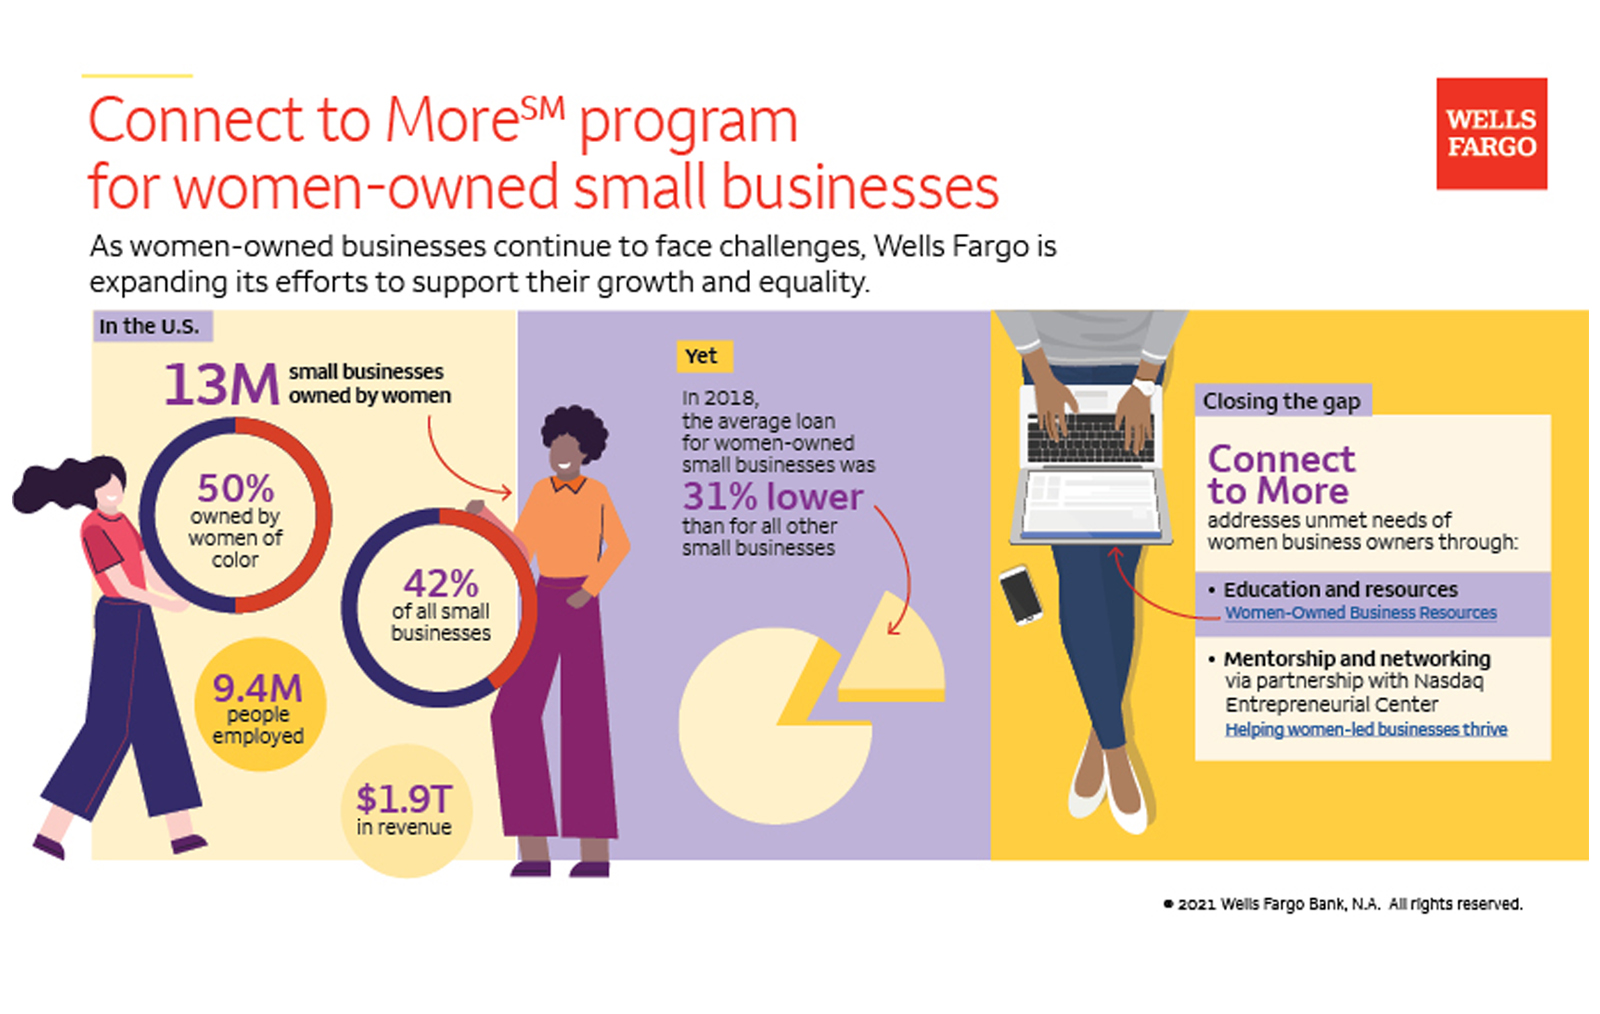 Connect to More (SM) program for women-owned small businesses